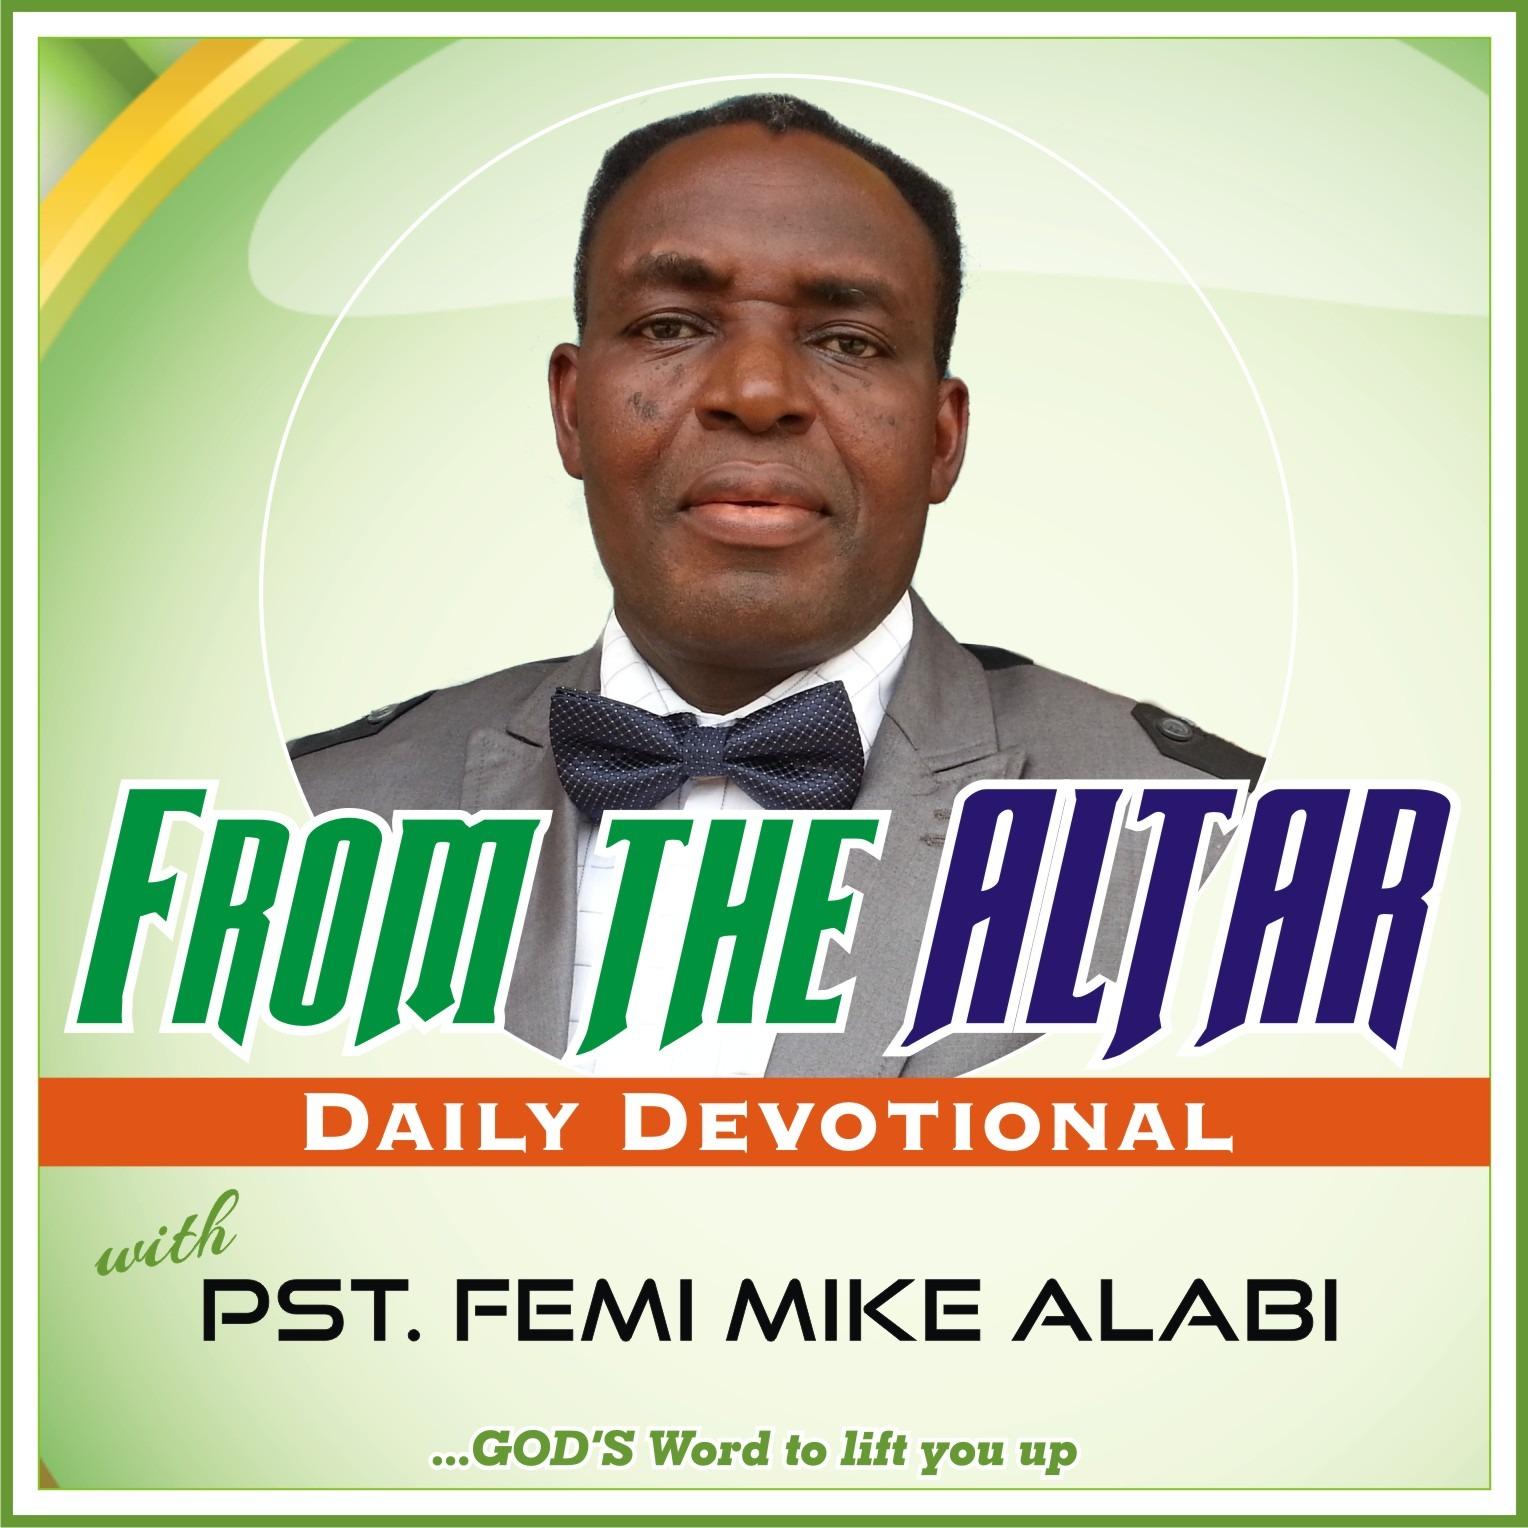 FROM THE ALTAR - Daily Devotional